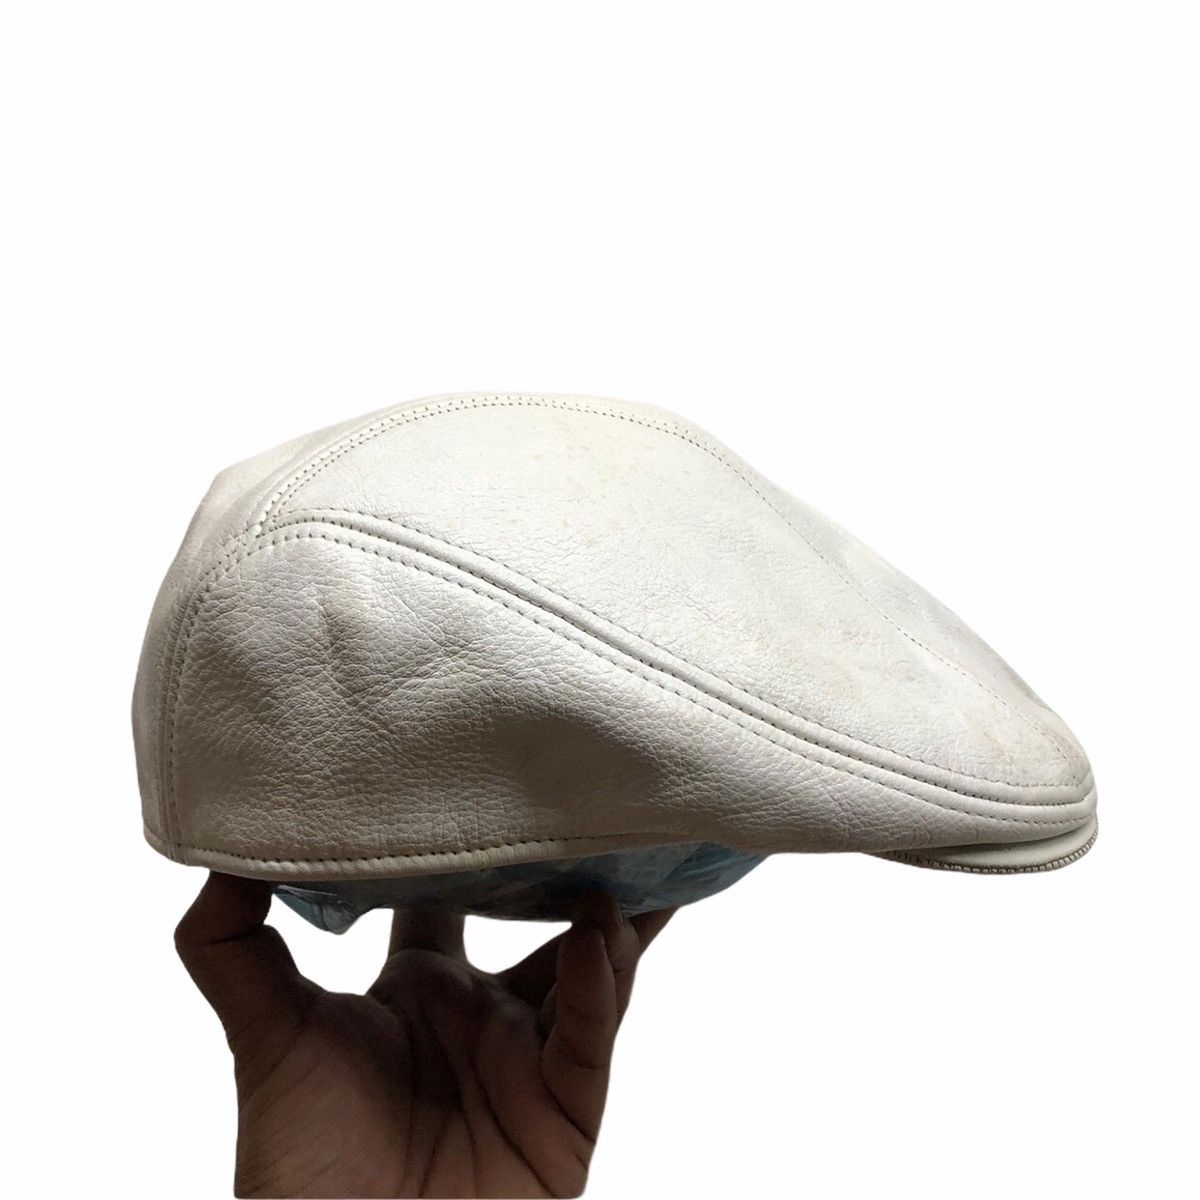 Vintage New York Hat Co. Beret Hat, White Leather Hats Caps Size ONE SIZE - 3 Thumbnail